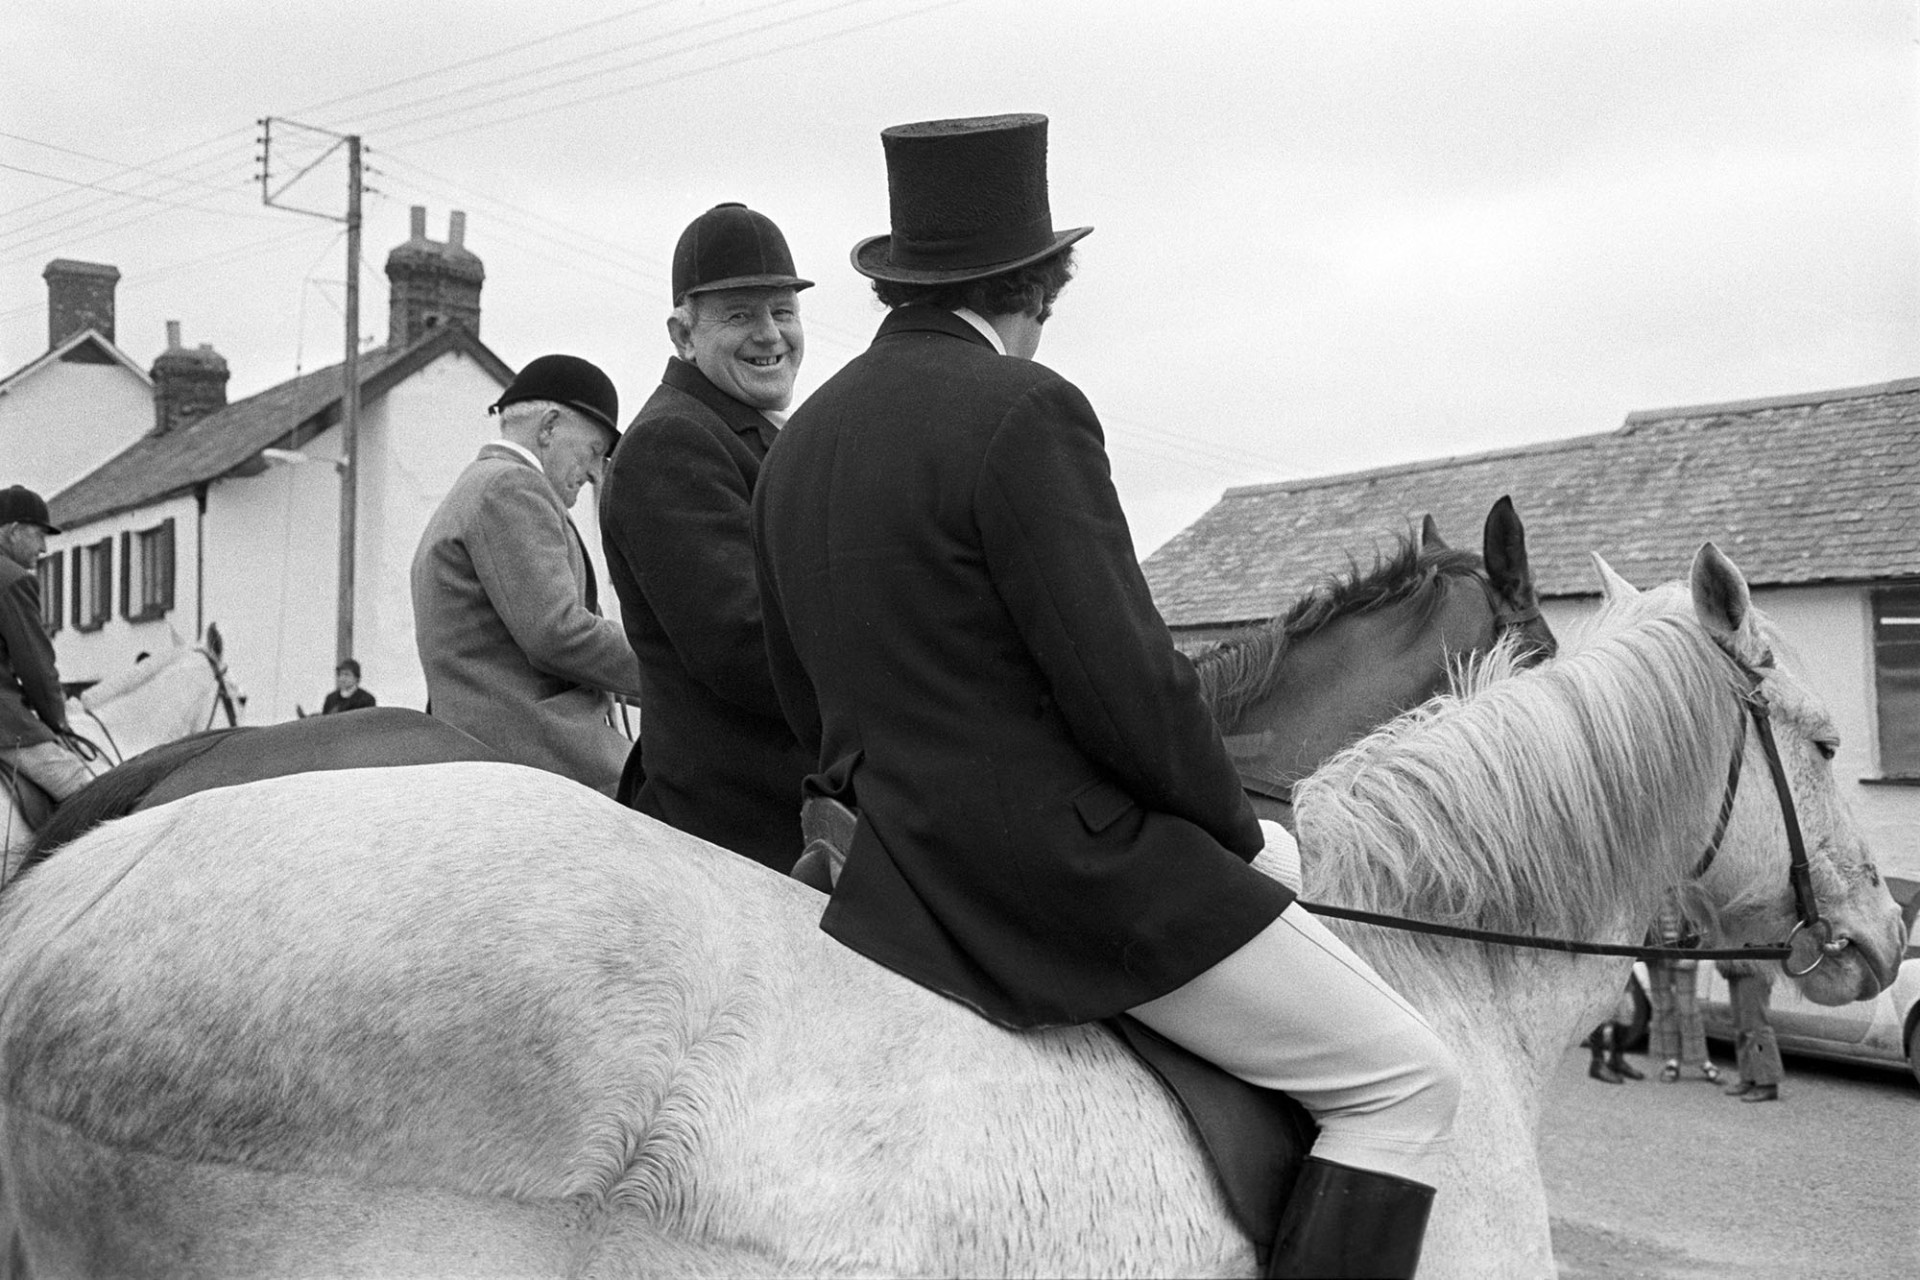 Hunt meet, Master of the Hounds Man in top hat.
[Two horse riders talking at a hunt meet at The Rams Head, Dolton. The man in the top hat is the Master of the Hunt.]